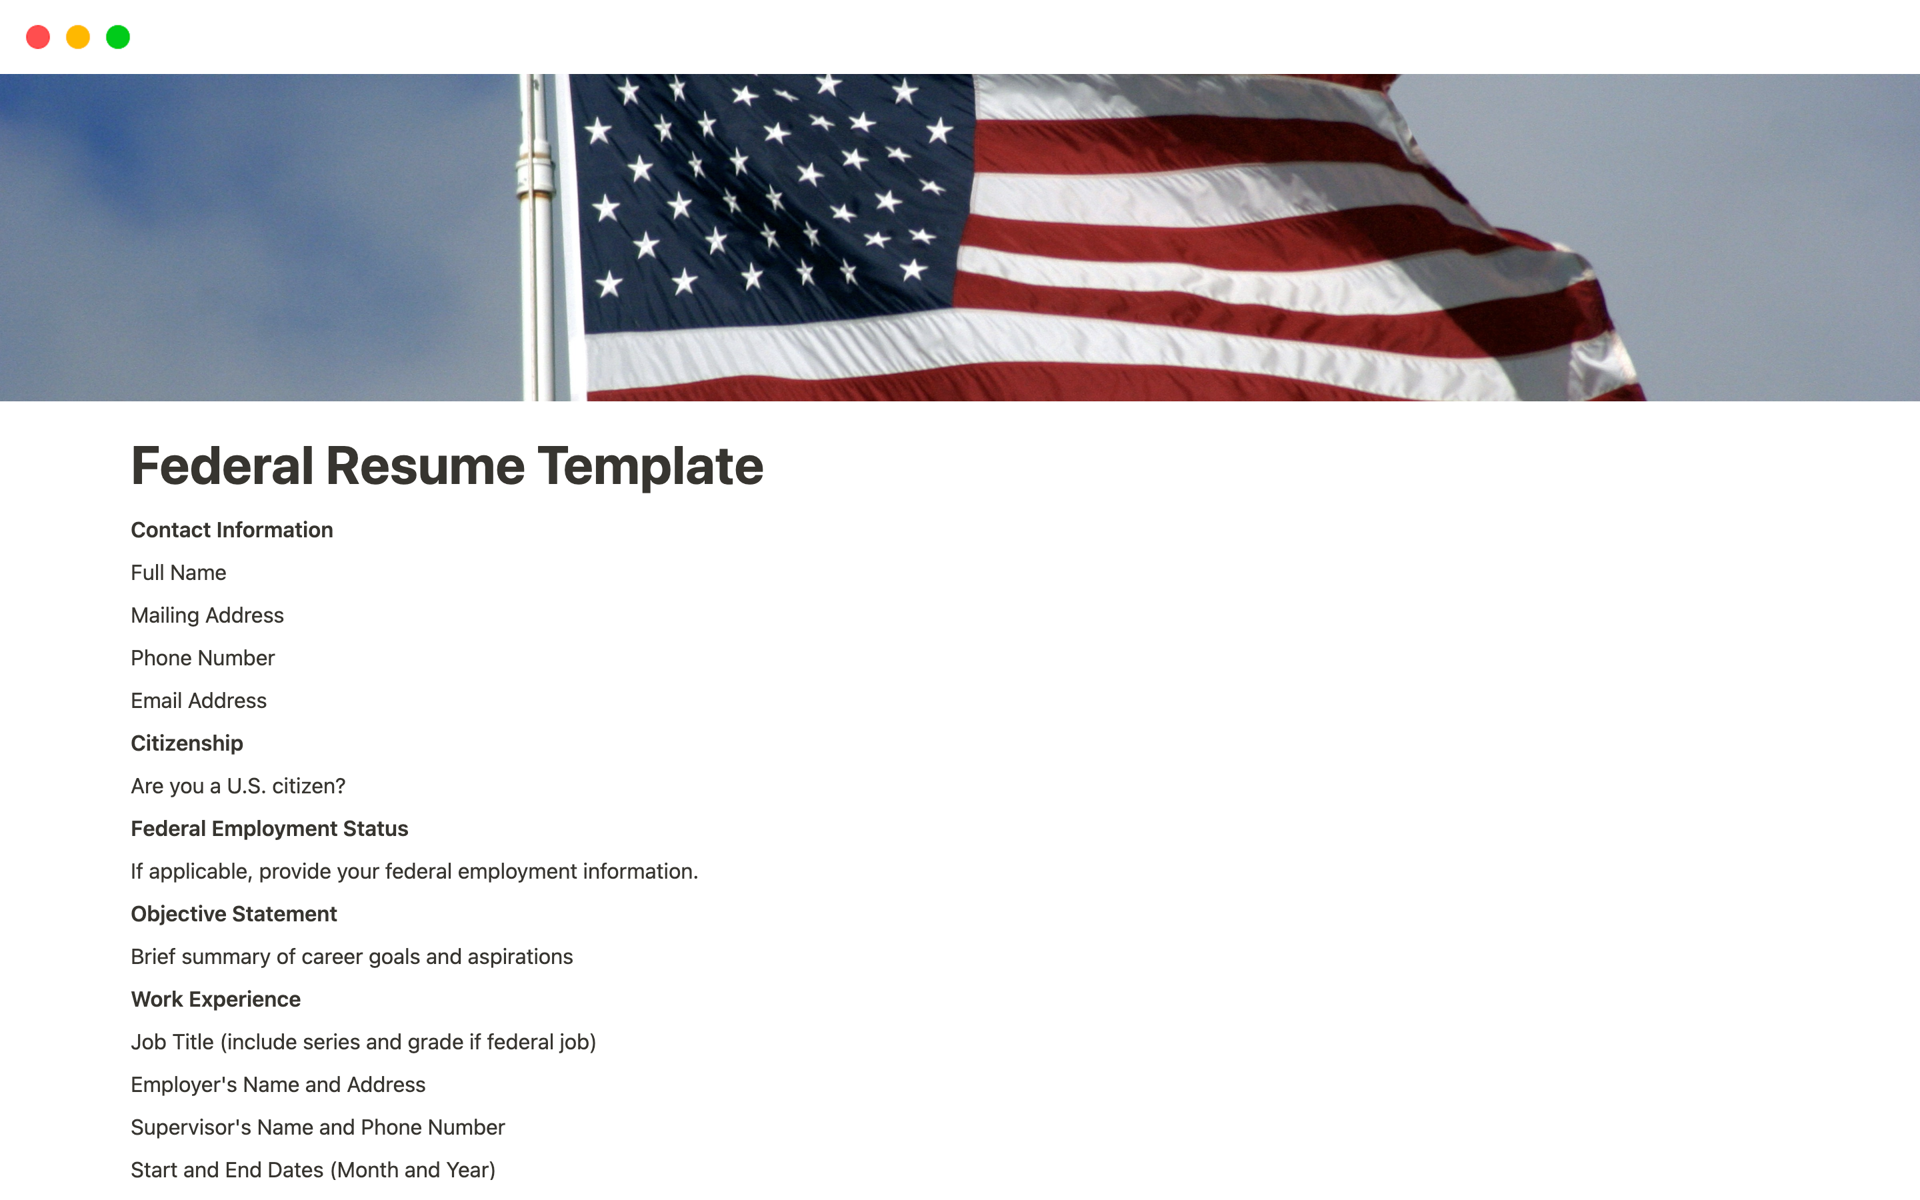 This is a federal resume Notion template.